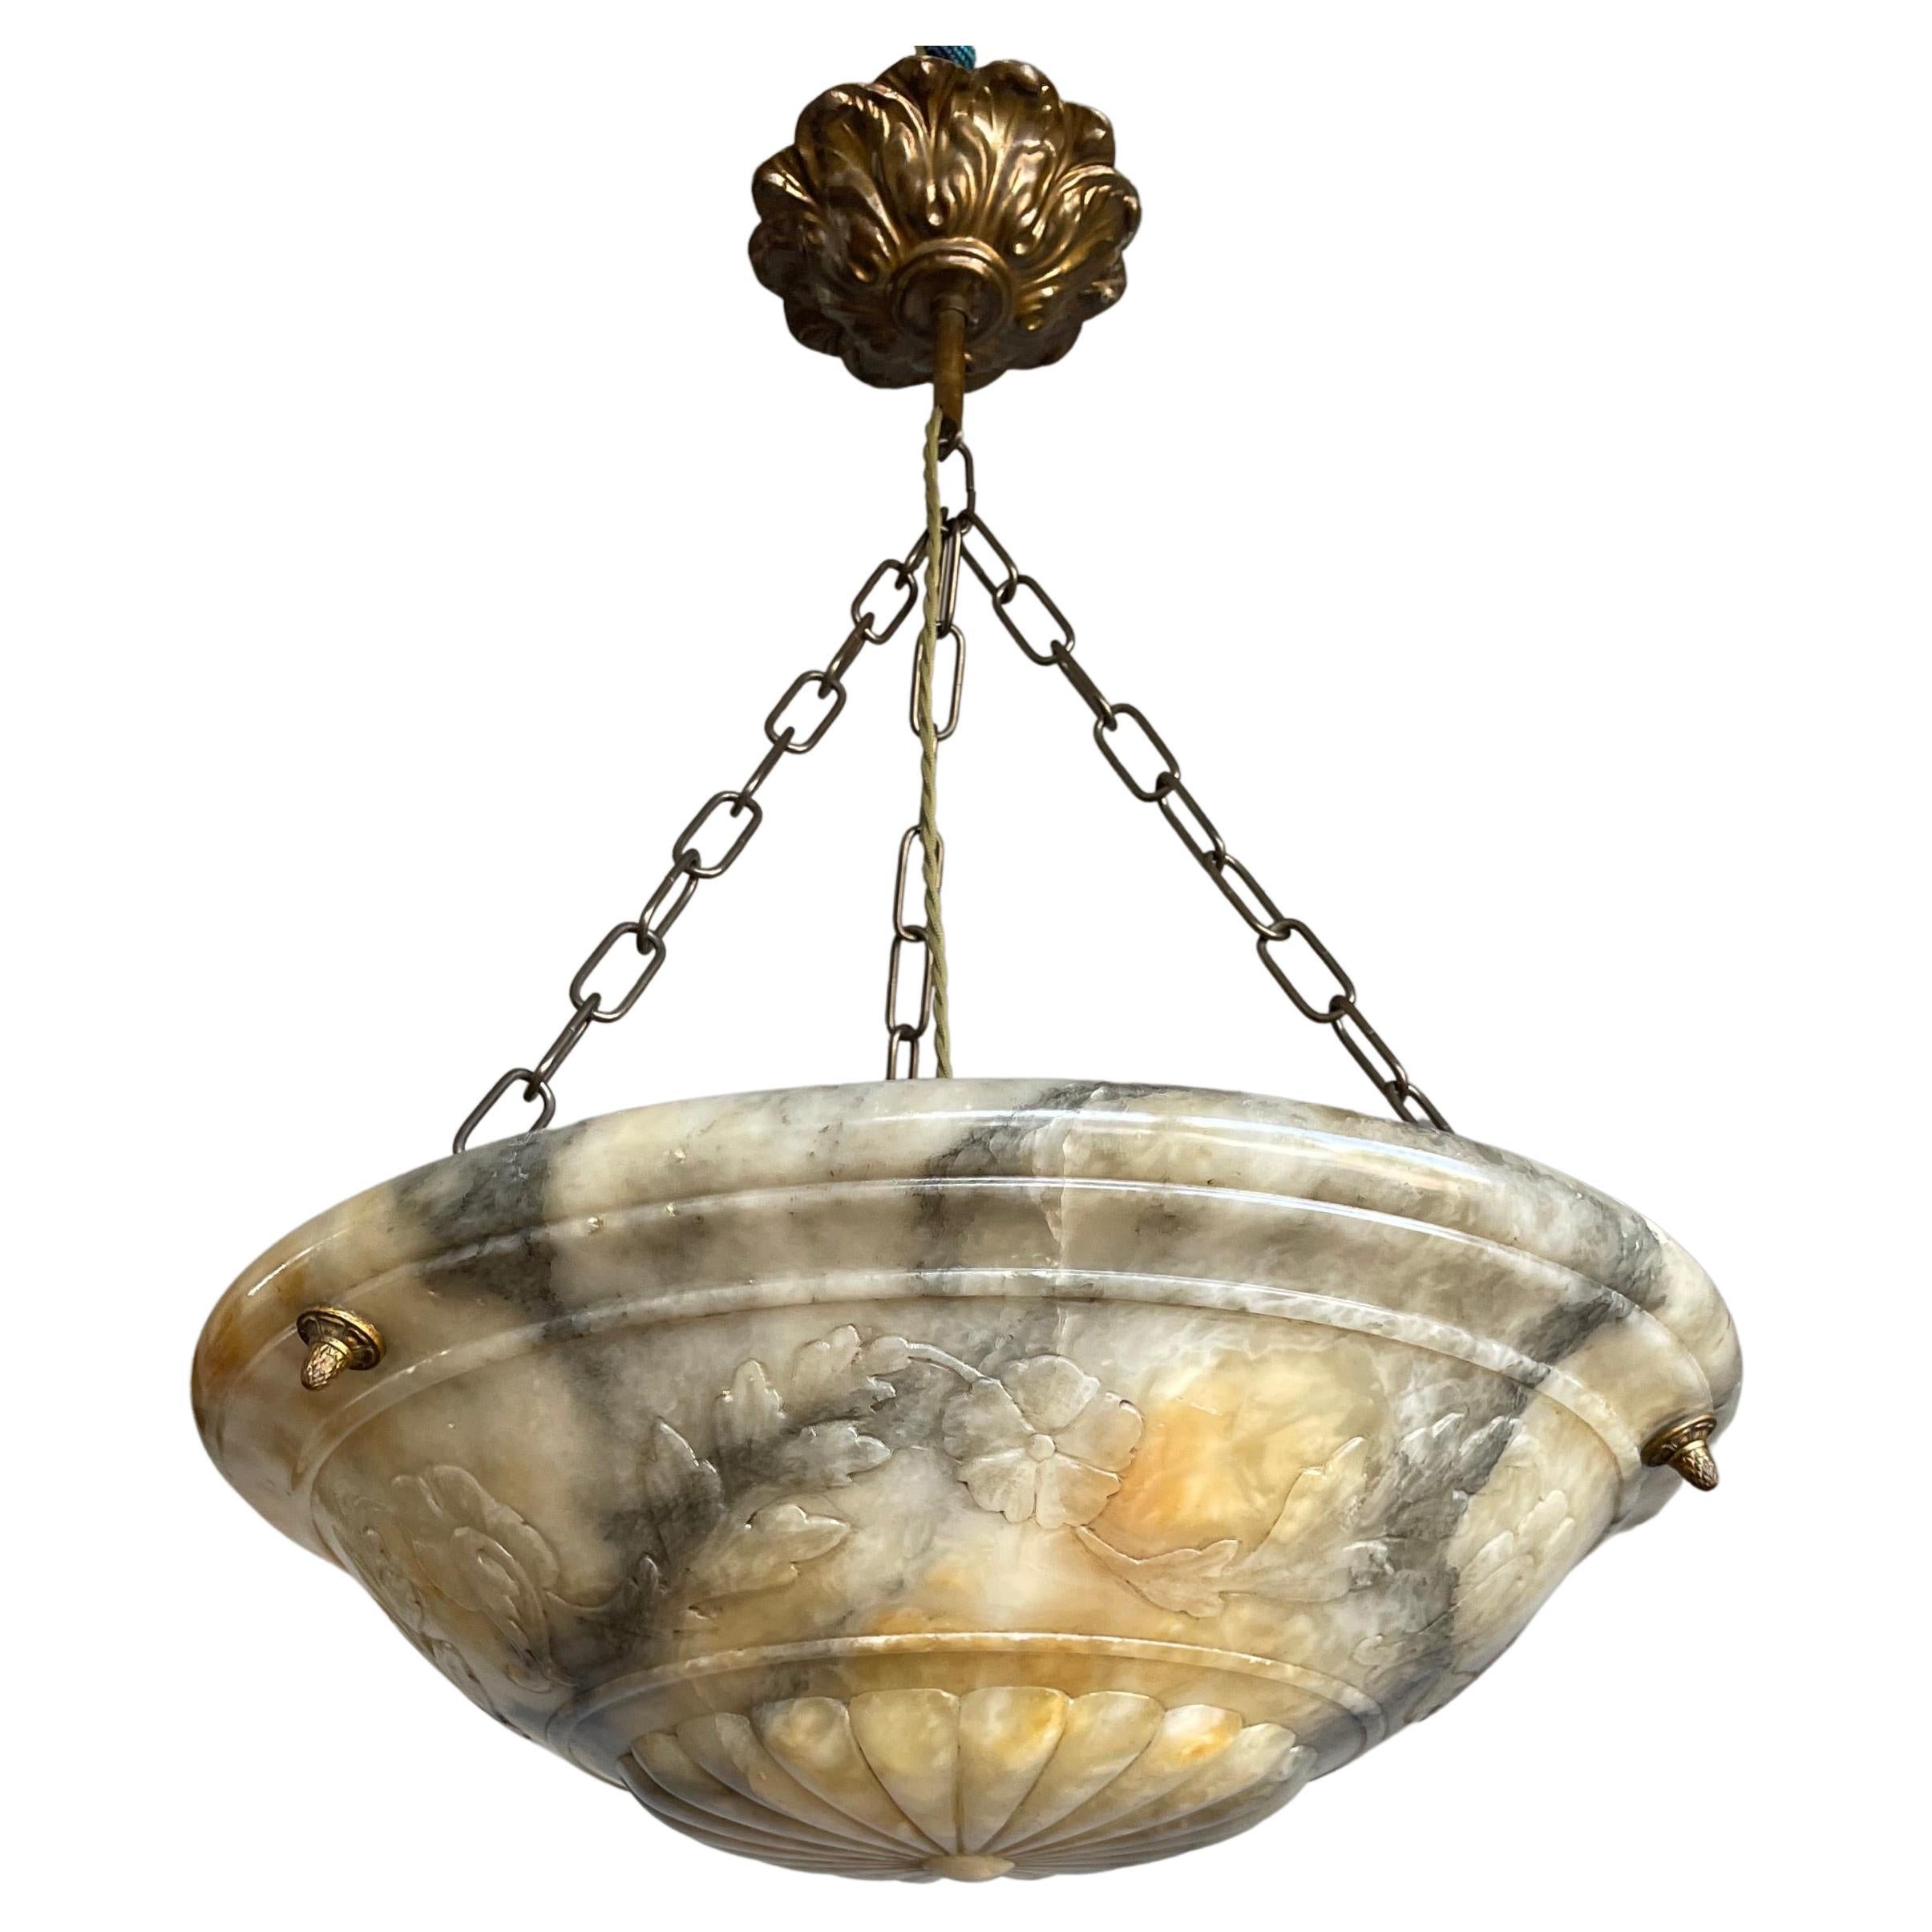 Large antique ceiling fixture / chandelier with stunning flowers & leafs hand carved in a beautiful alabaster stone dish shade of 19.7 inches in diameter.

Thanks to its unique design, its large size and its truly excellent condition this alabaster